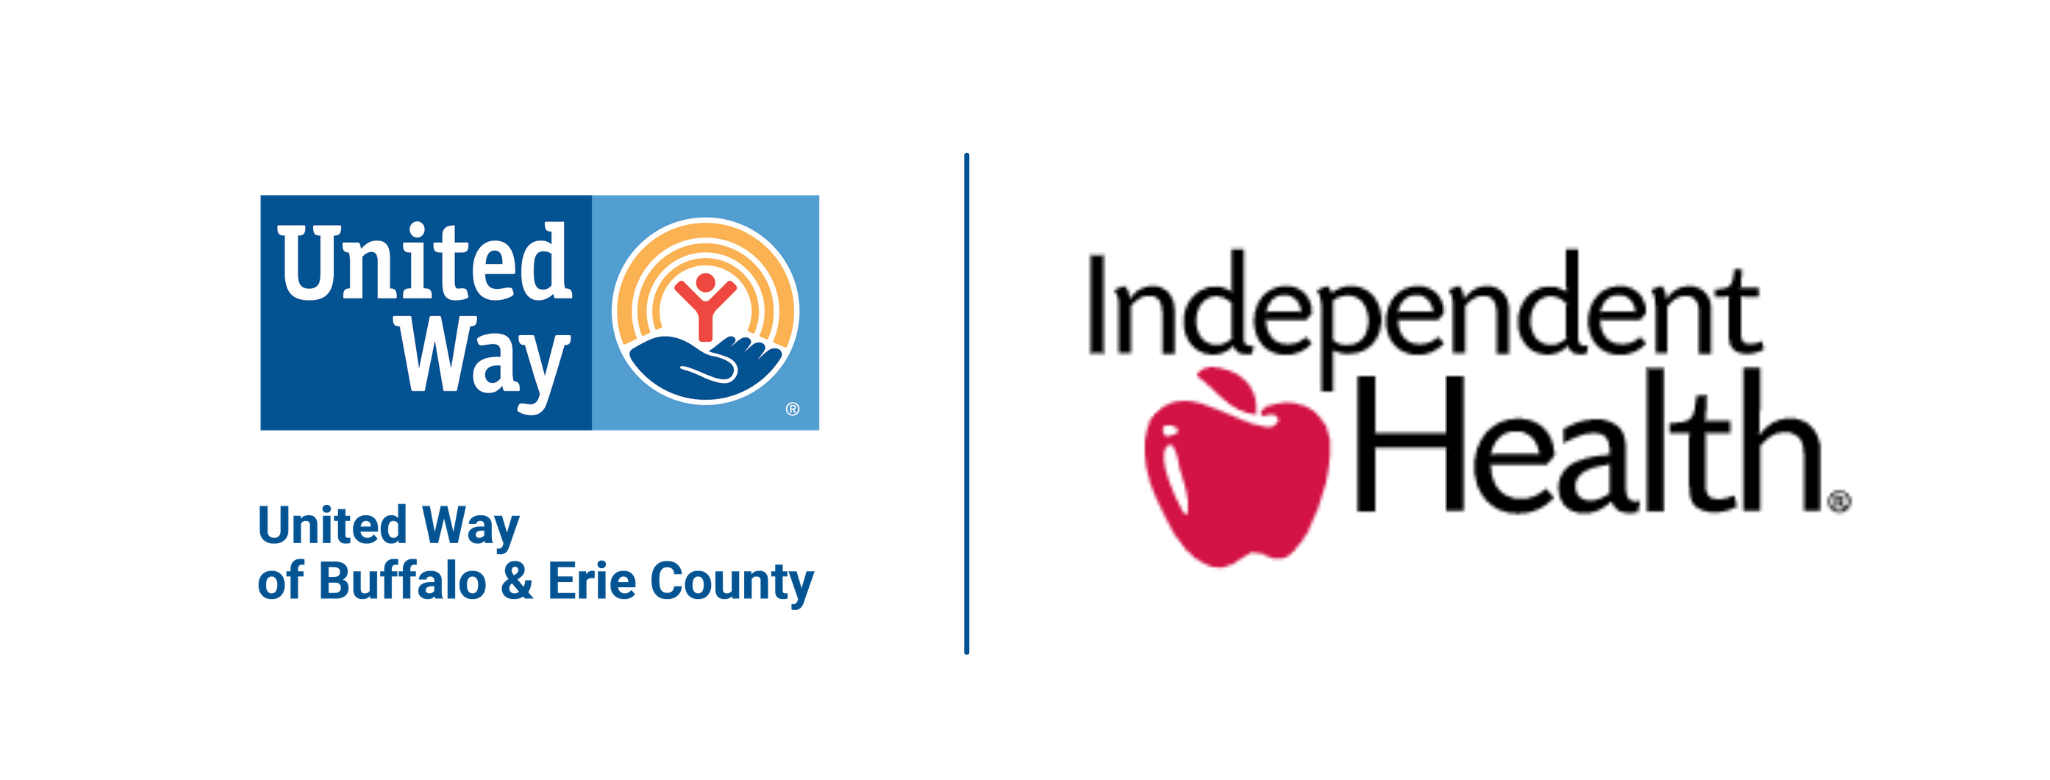 United Way Buffalo & Erie County Partners with Independent Health in Giving Challenge Image